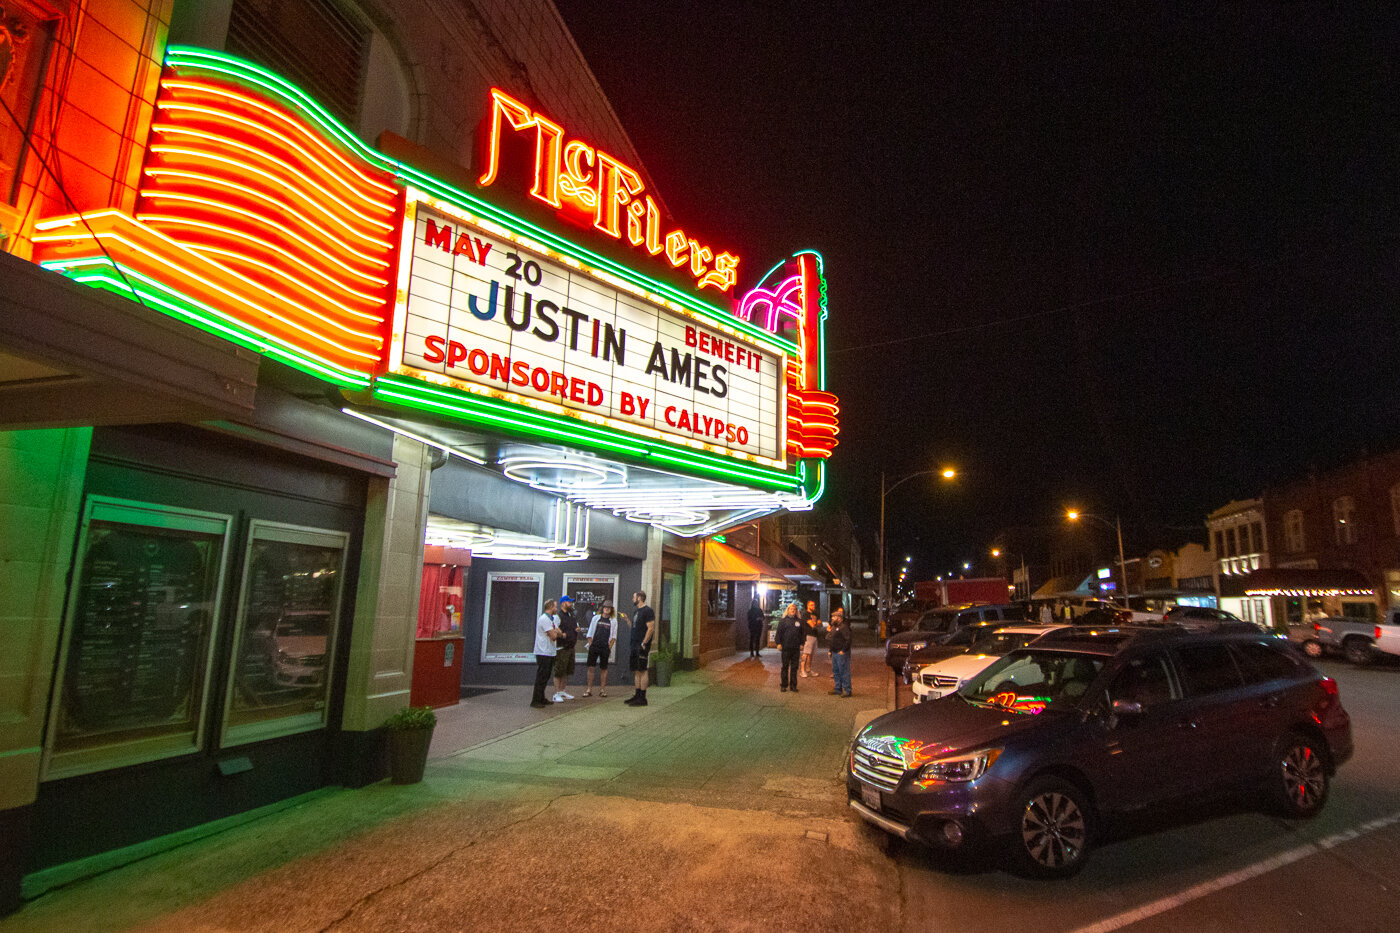 The marquee of McFiler's Chehalis Theater was lit up Saturday night for the Justin Ames benefit.